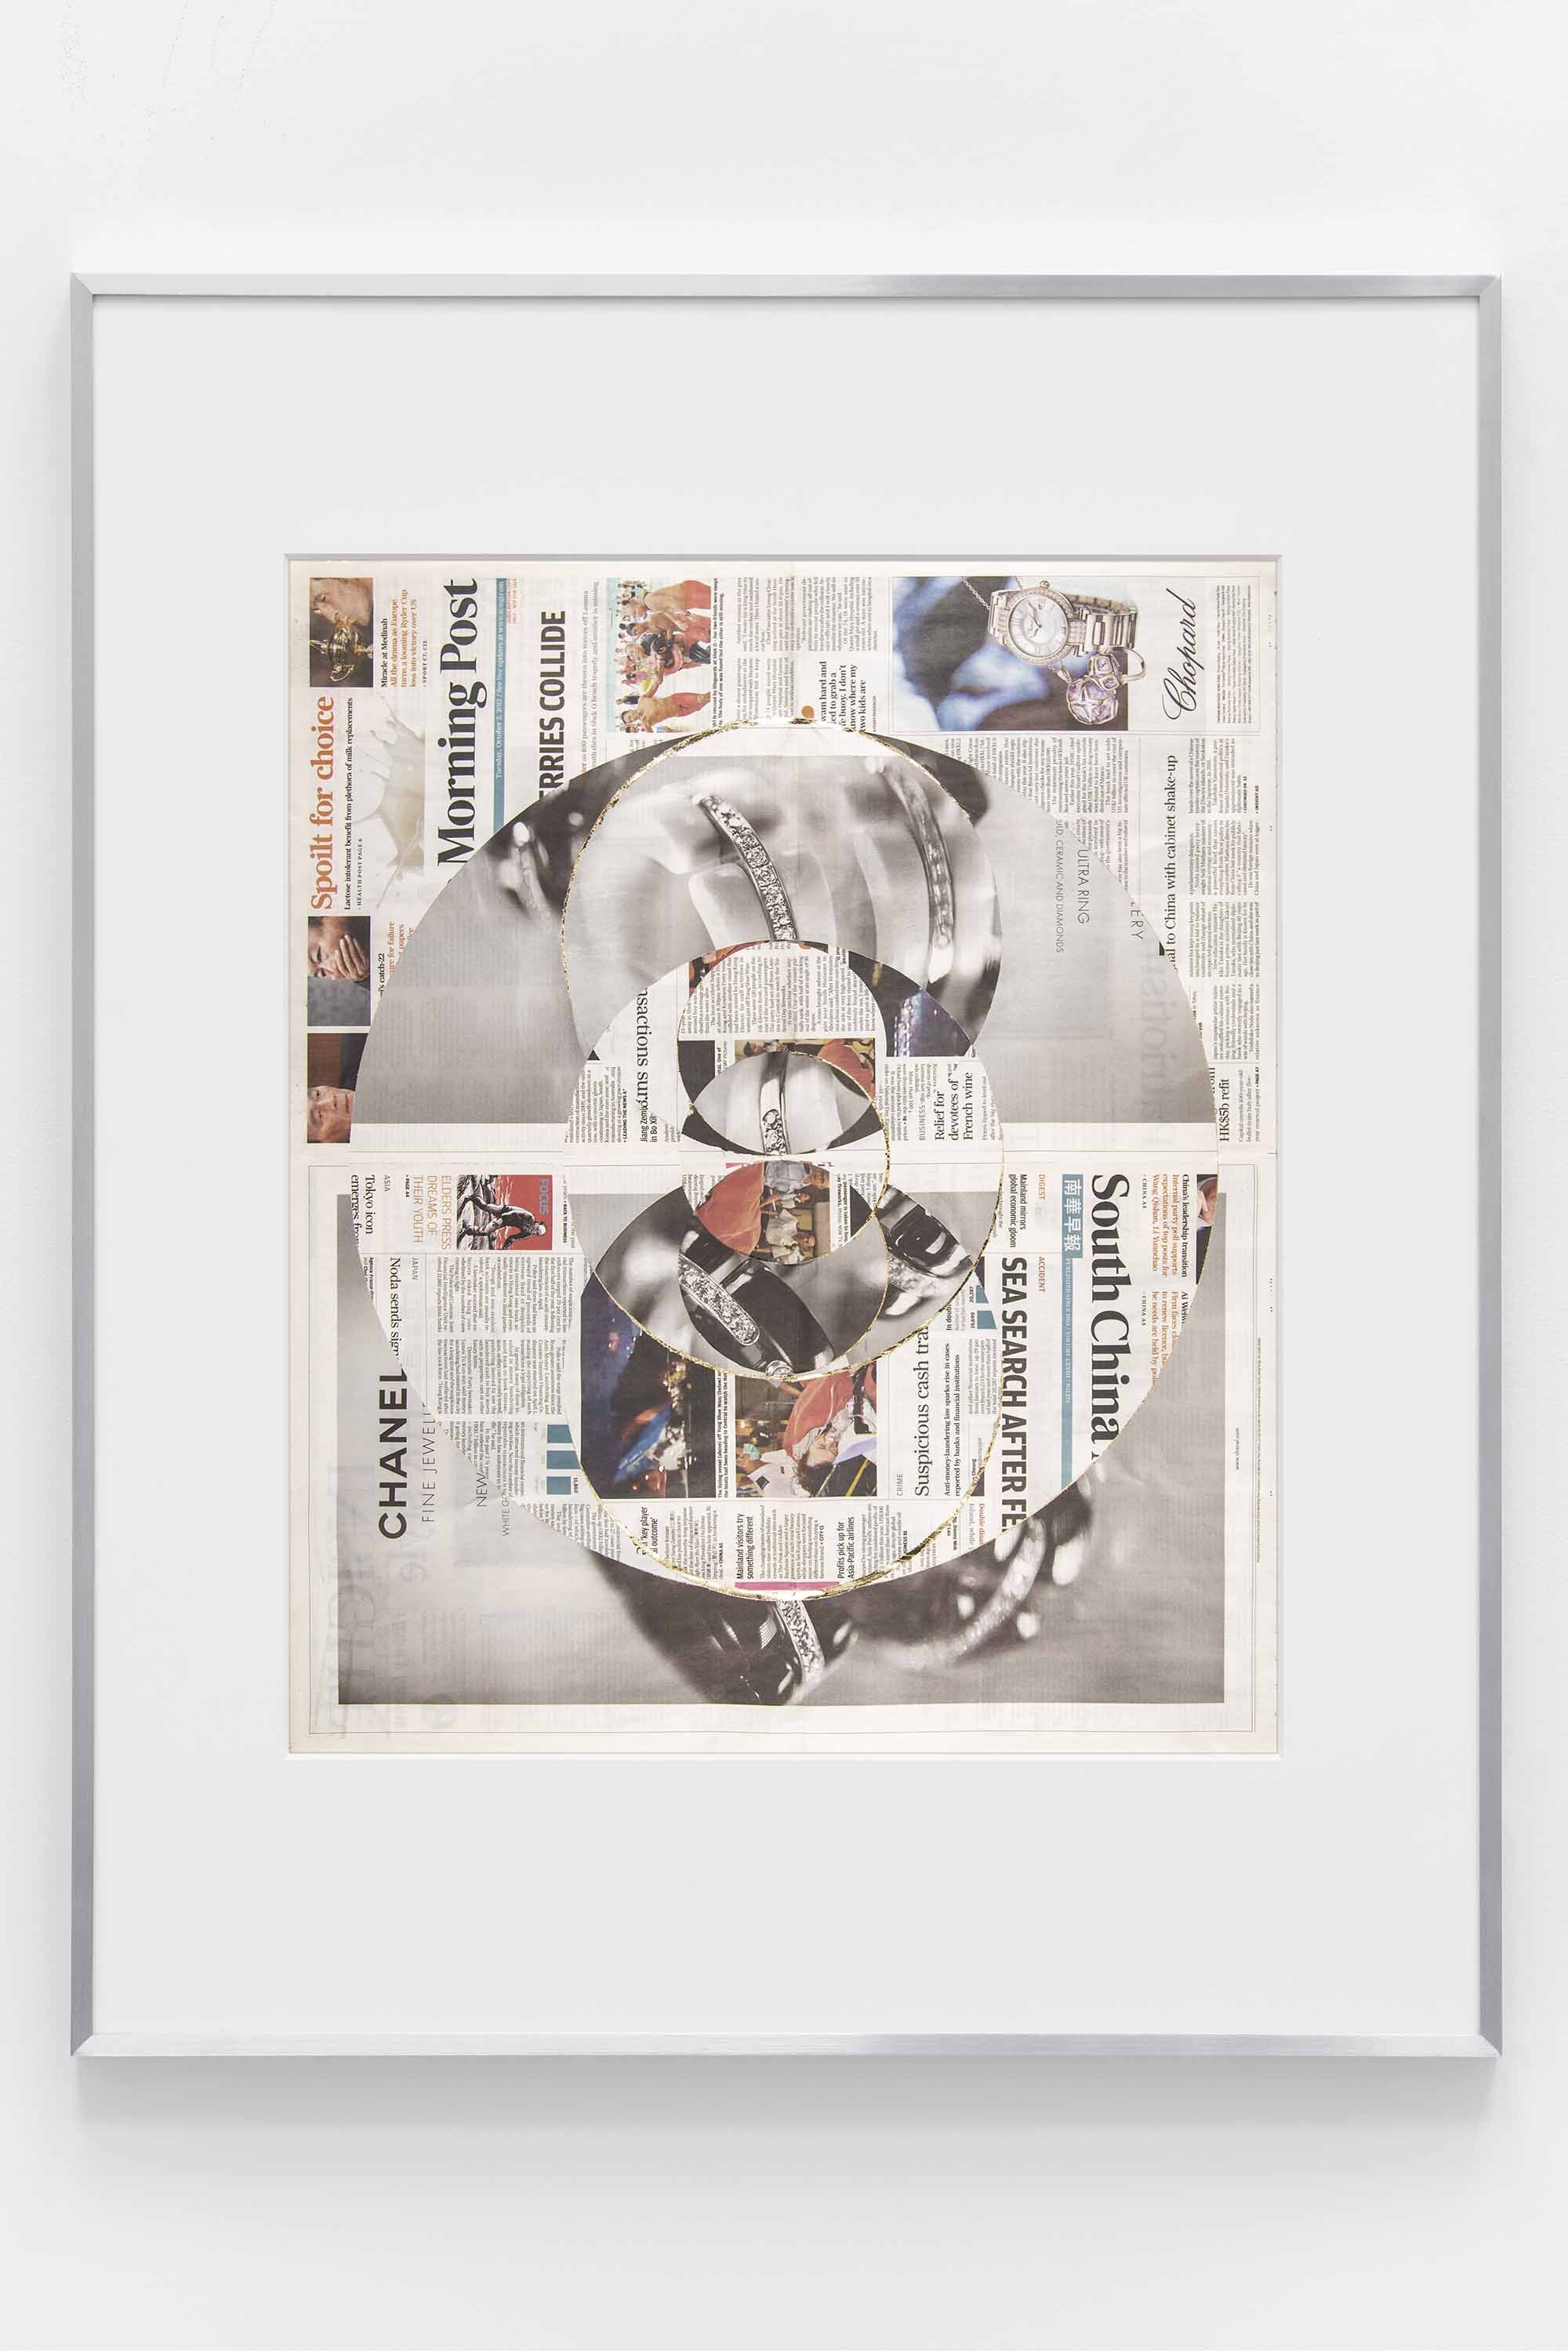   Blind Collage (Seven 180º Rotations, South China Morning Post: Tai Po, Hong Kong, Tuesday, October 2, 2012)   2021  Newspaper, tape, and 22 karat gold leaf  39 1/8 x 31 1/4 inches   Blind Collages, 2017–   Exhibition:   Foreign Correspondence, 2021